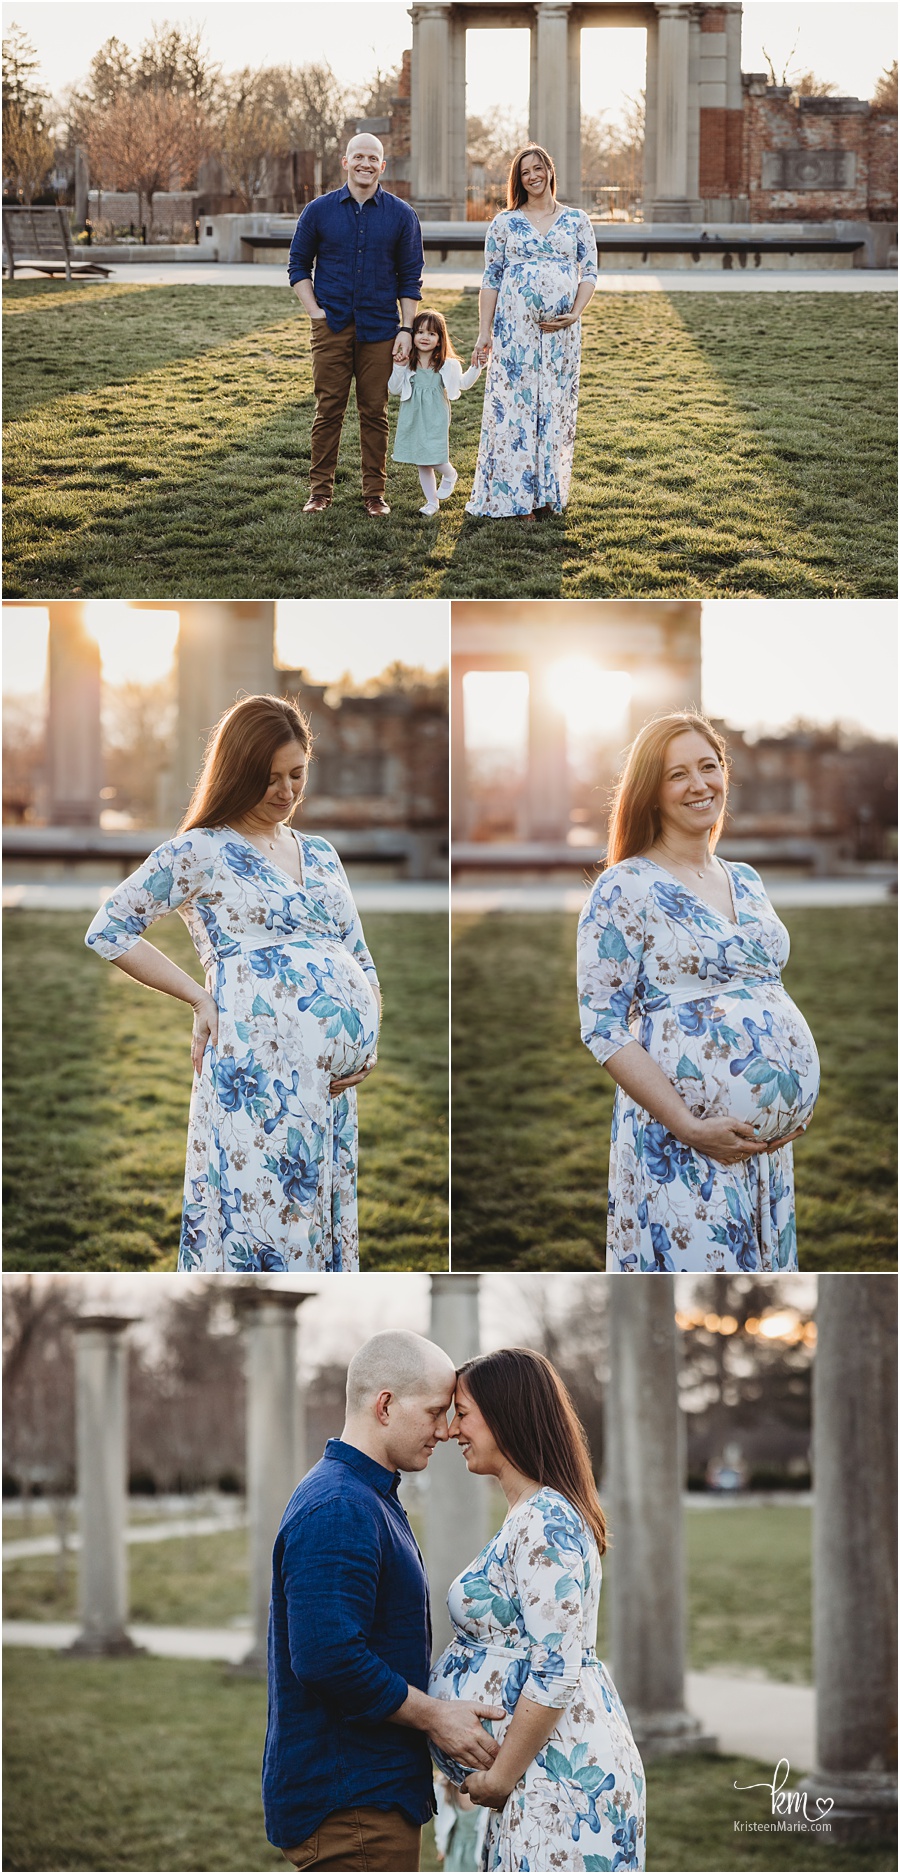 Maternity pictures at Holiday Park in Indianapolis, IN